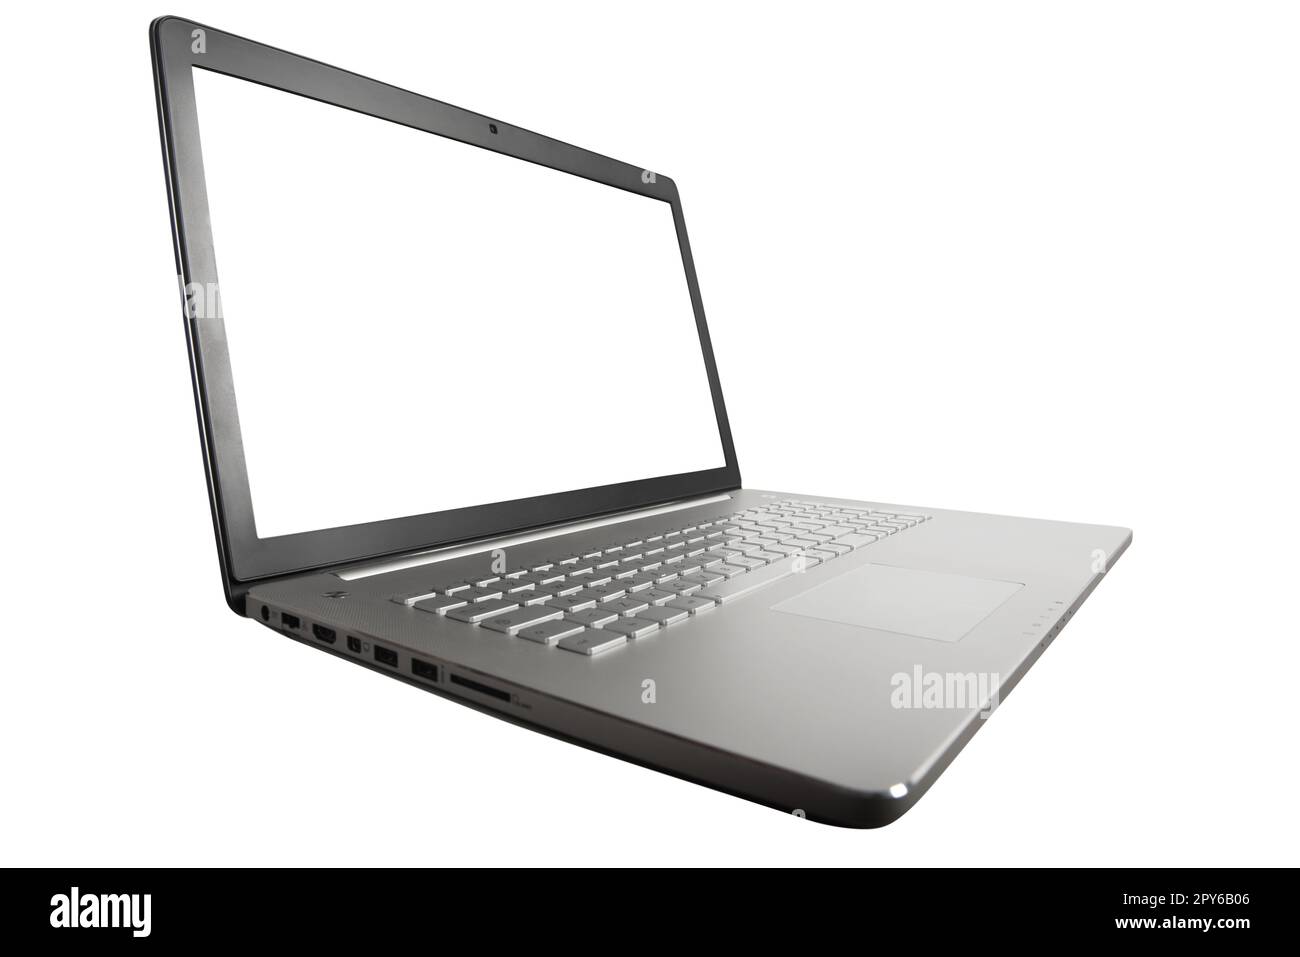 Image of a laptop. concept of internet sharing and technology Stock Photo